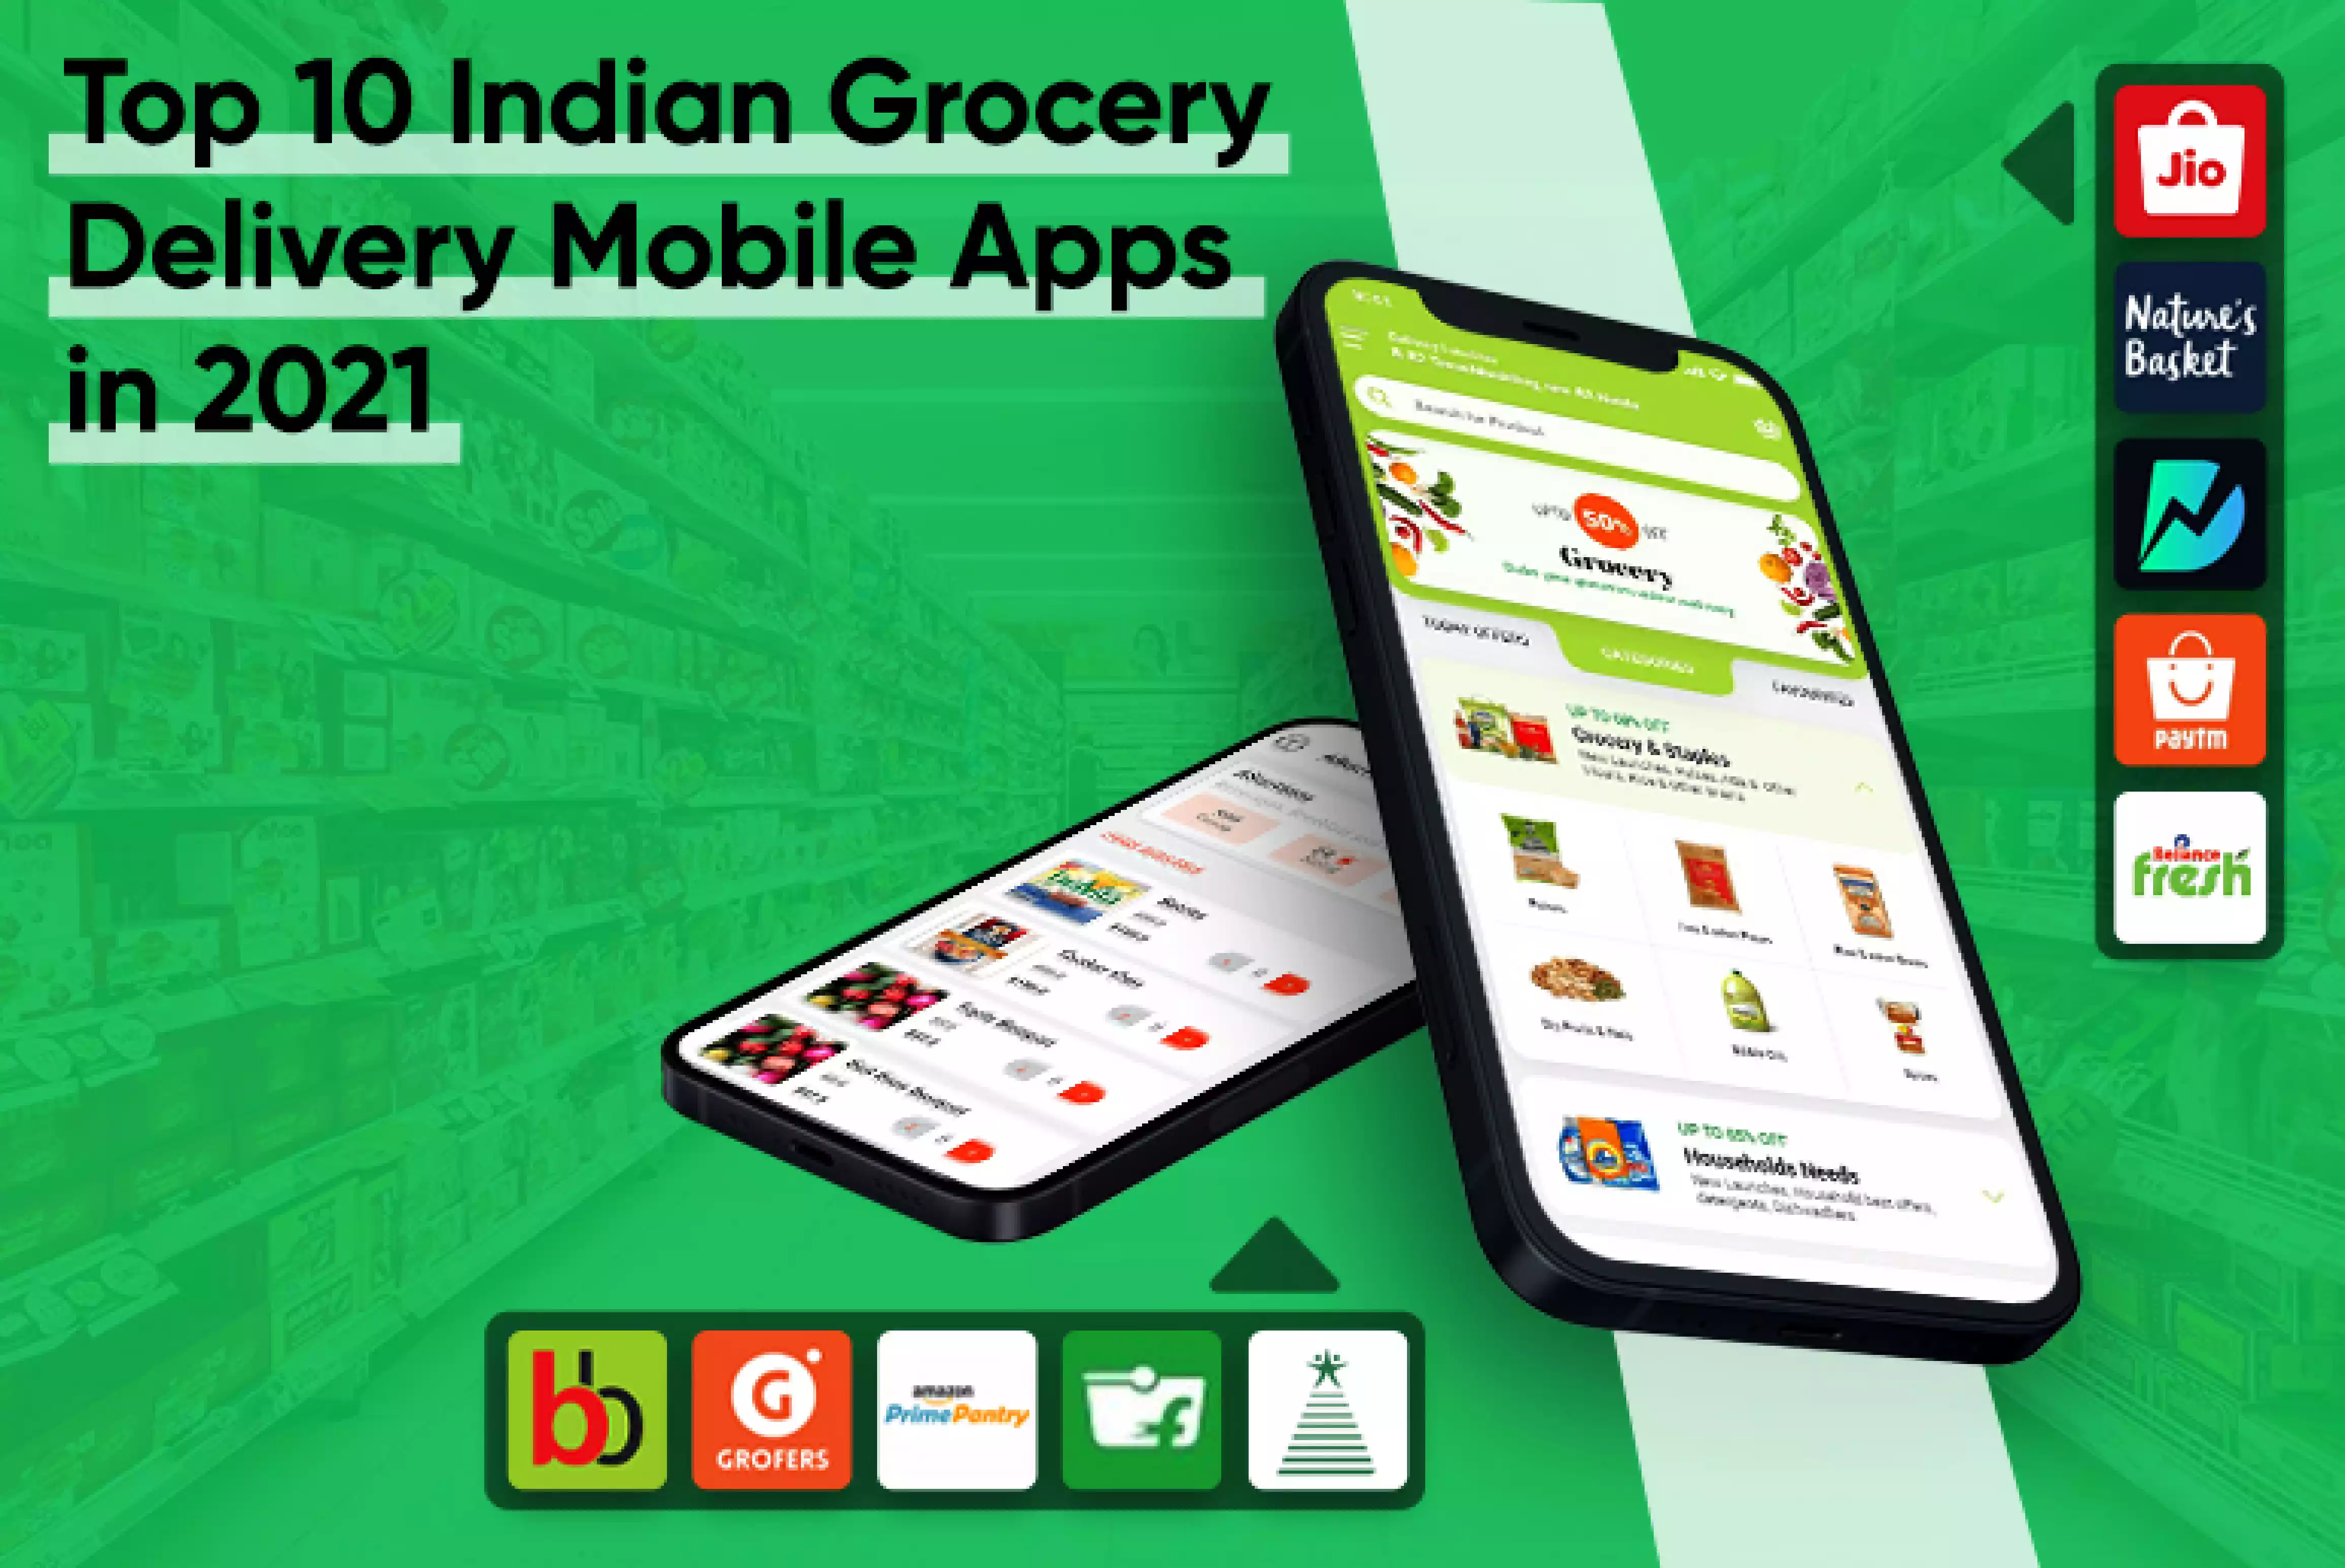 Top 10 Indian Grocery Delivery Mobile Apps in 2021_Thum